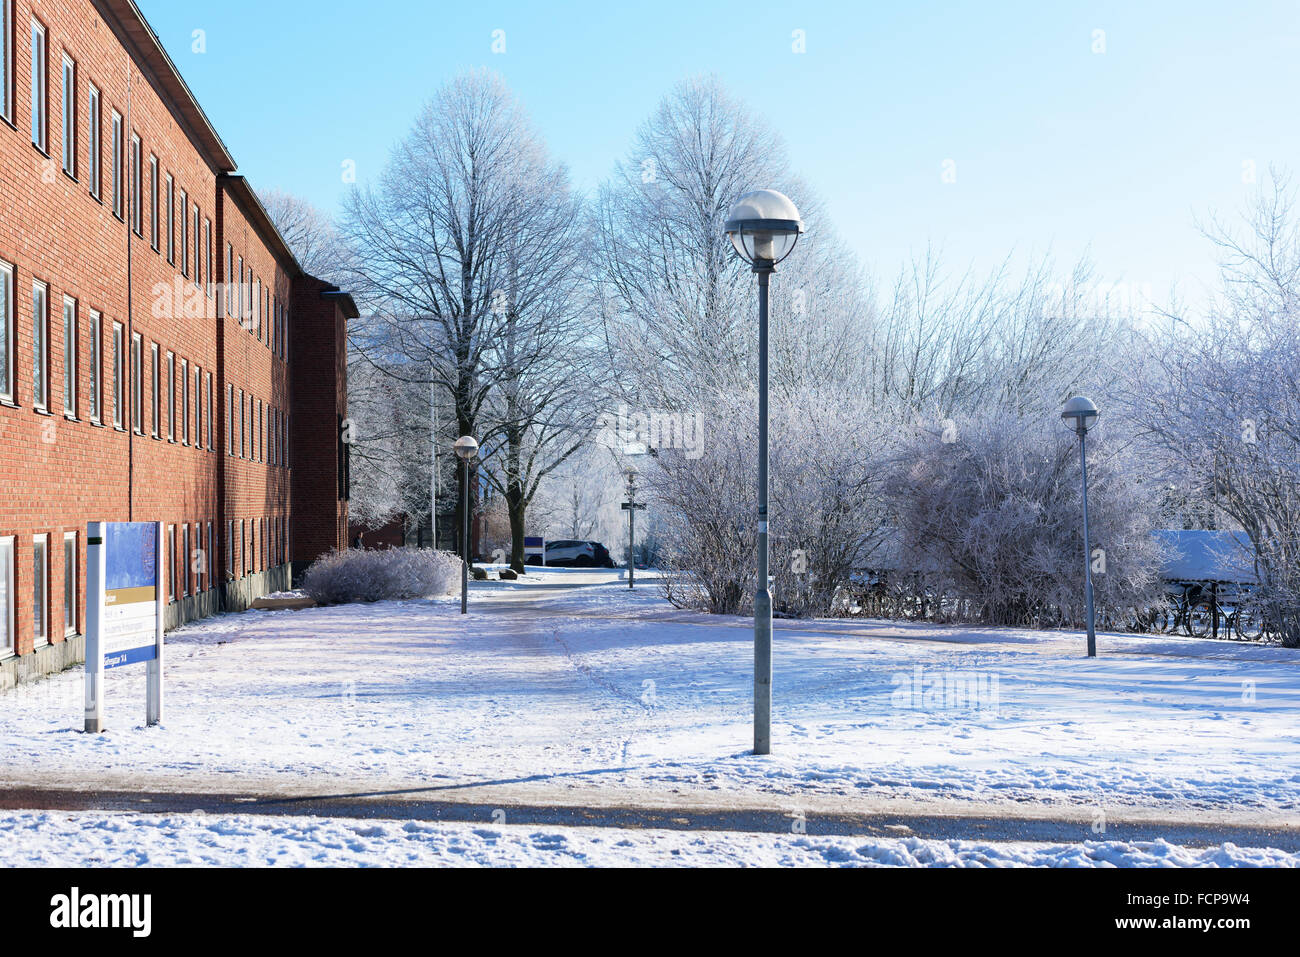 Lund, Sweden - January 21, 2016: Fine walkway past the Fysicum at Lund university. Frosty trees and shrubs together with streetl Stock Photo